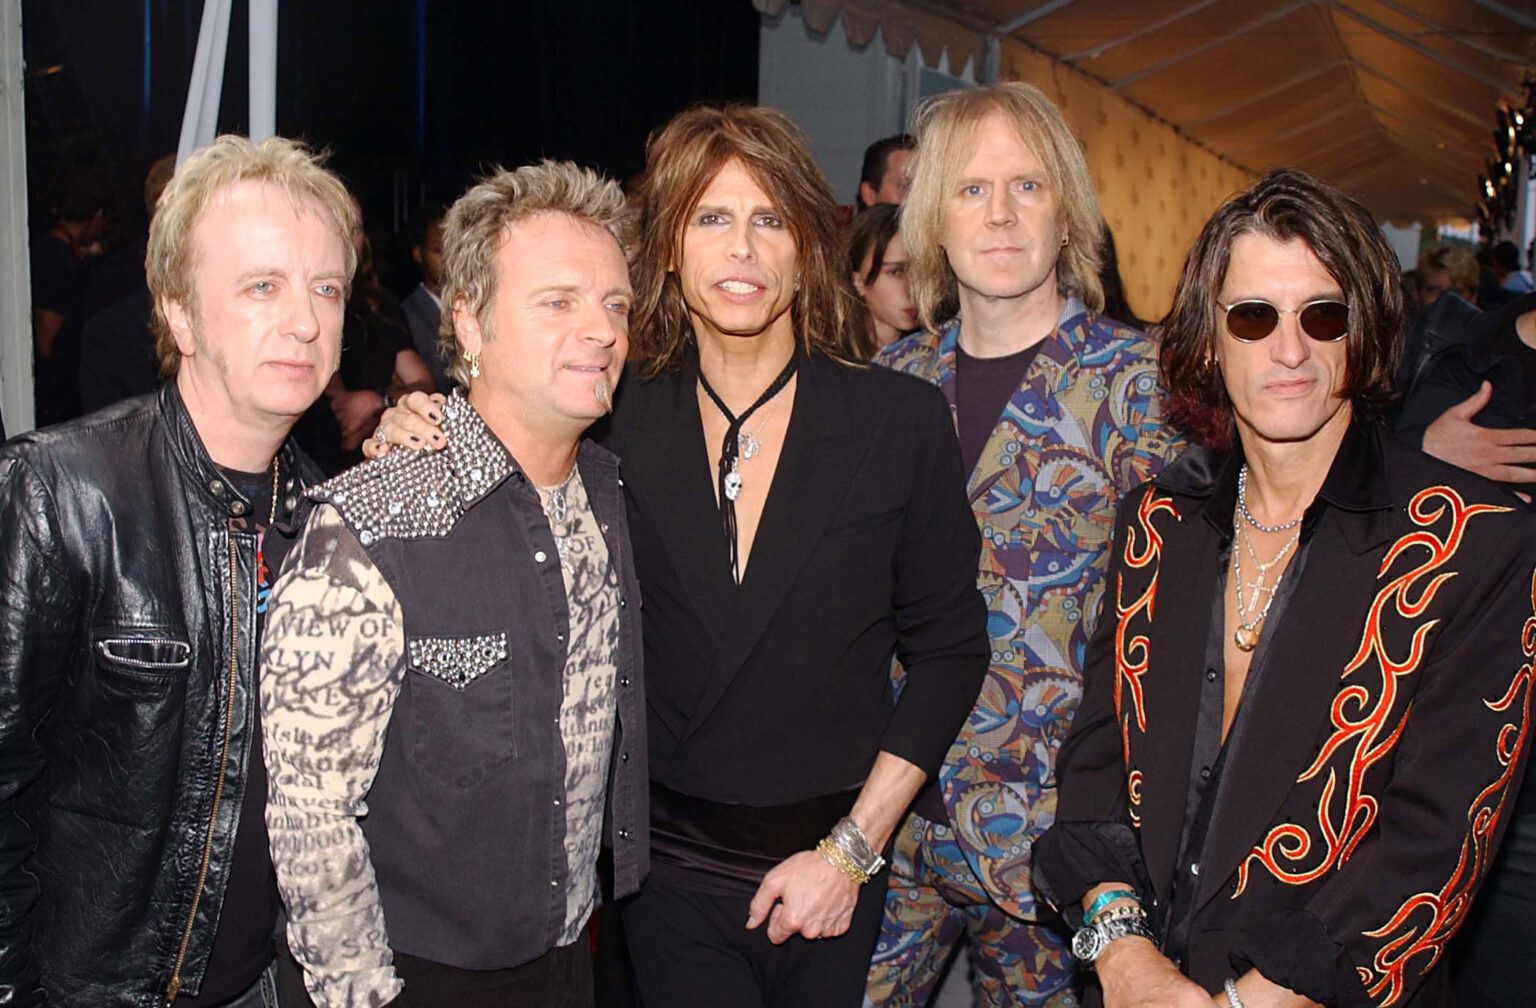 Aerosmith to Release Unarchived 1971 Rehearsal Recording The Road